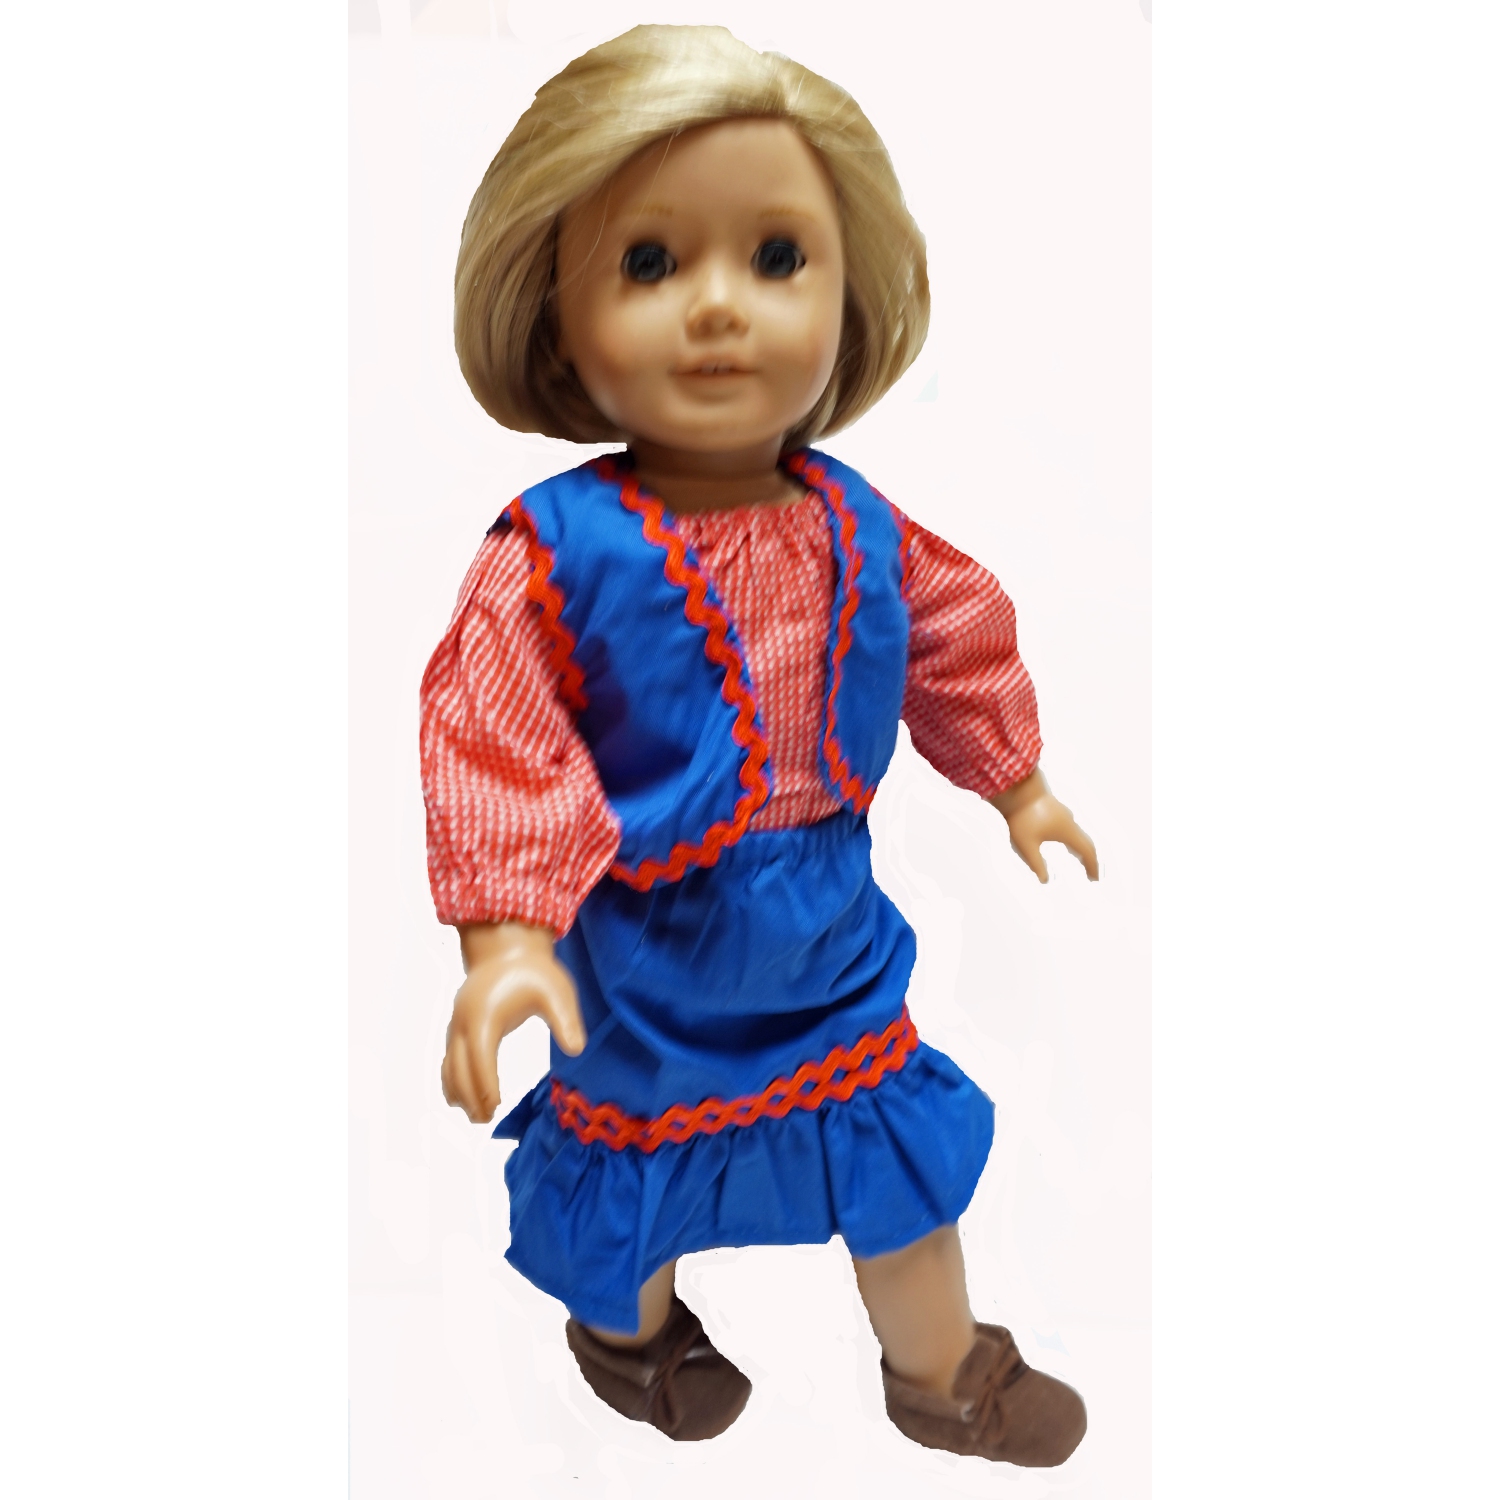 Kickin Up Your Heels Hand Clappin Good Time Fits 18 Inch Girl Dolls Like American Girl